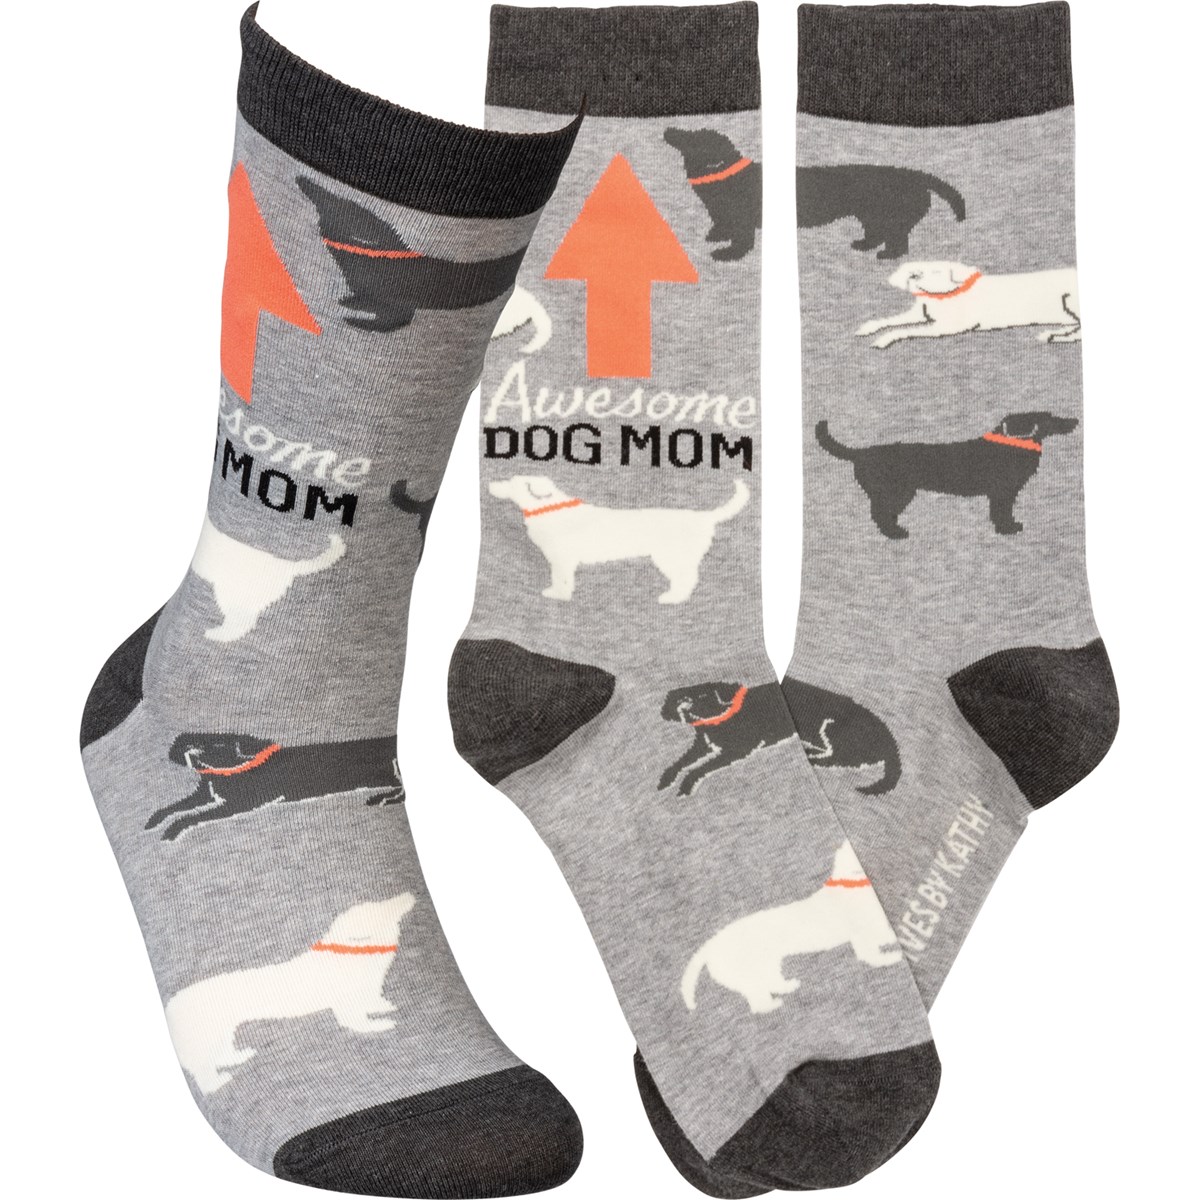 Socks - Awesome Dog Mom - One Size Fits Most - Cotton, Nylon, Spandex